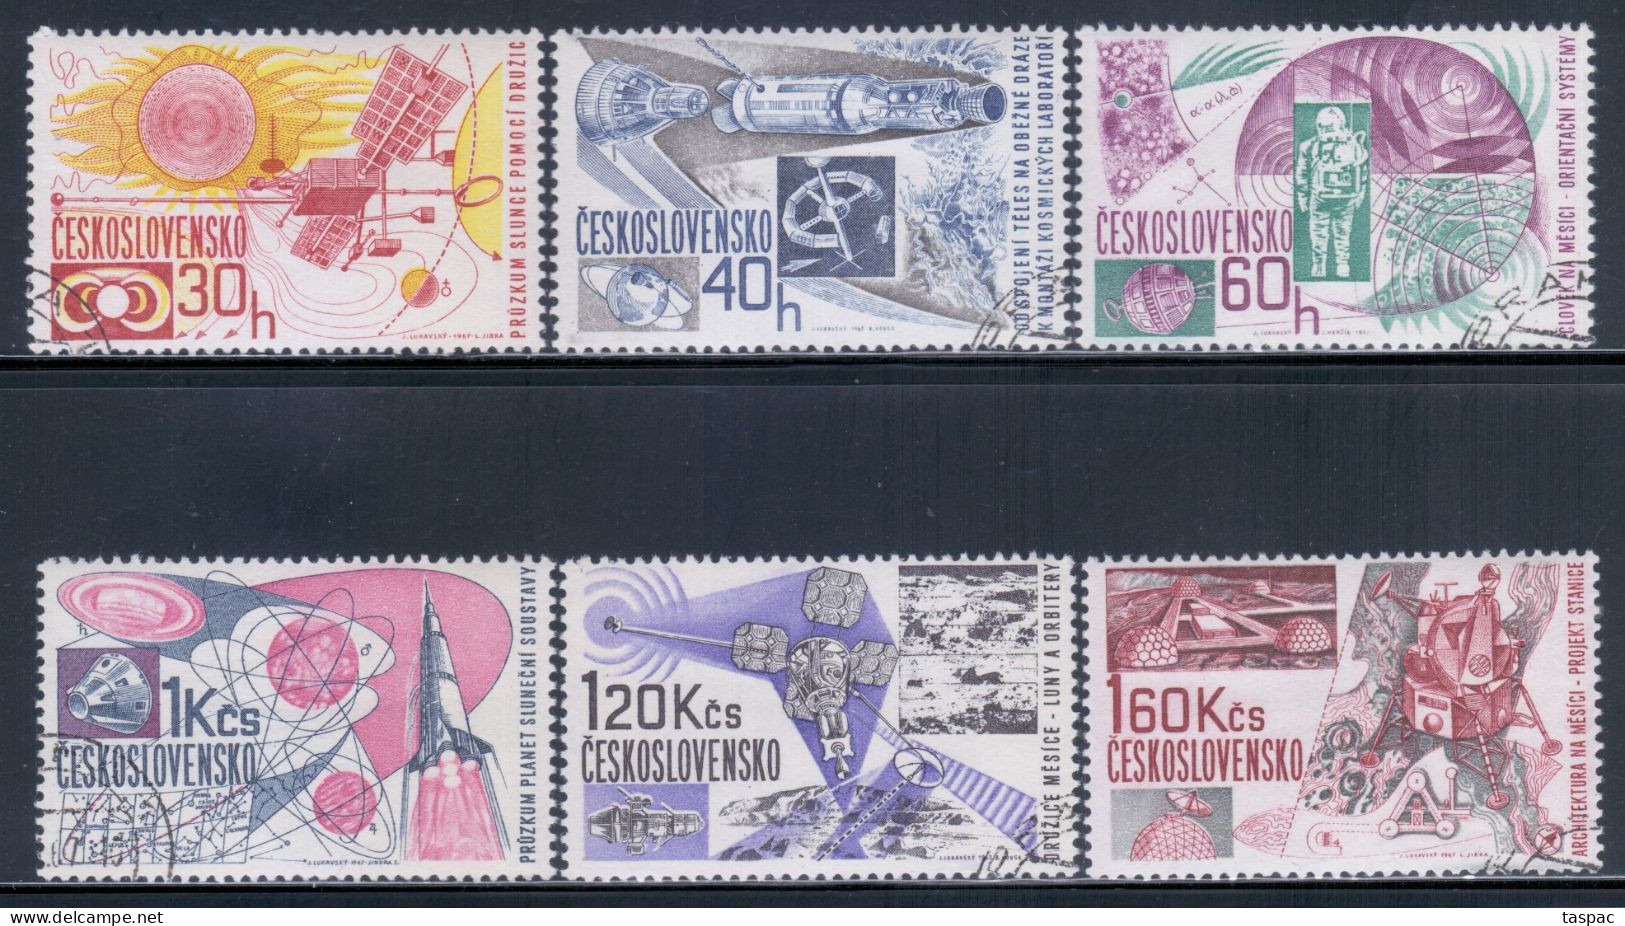 Czechoslovakia 1967 Mi# 1688-1693 Used - Space Research - Used Stamps